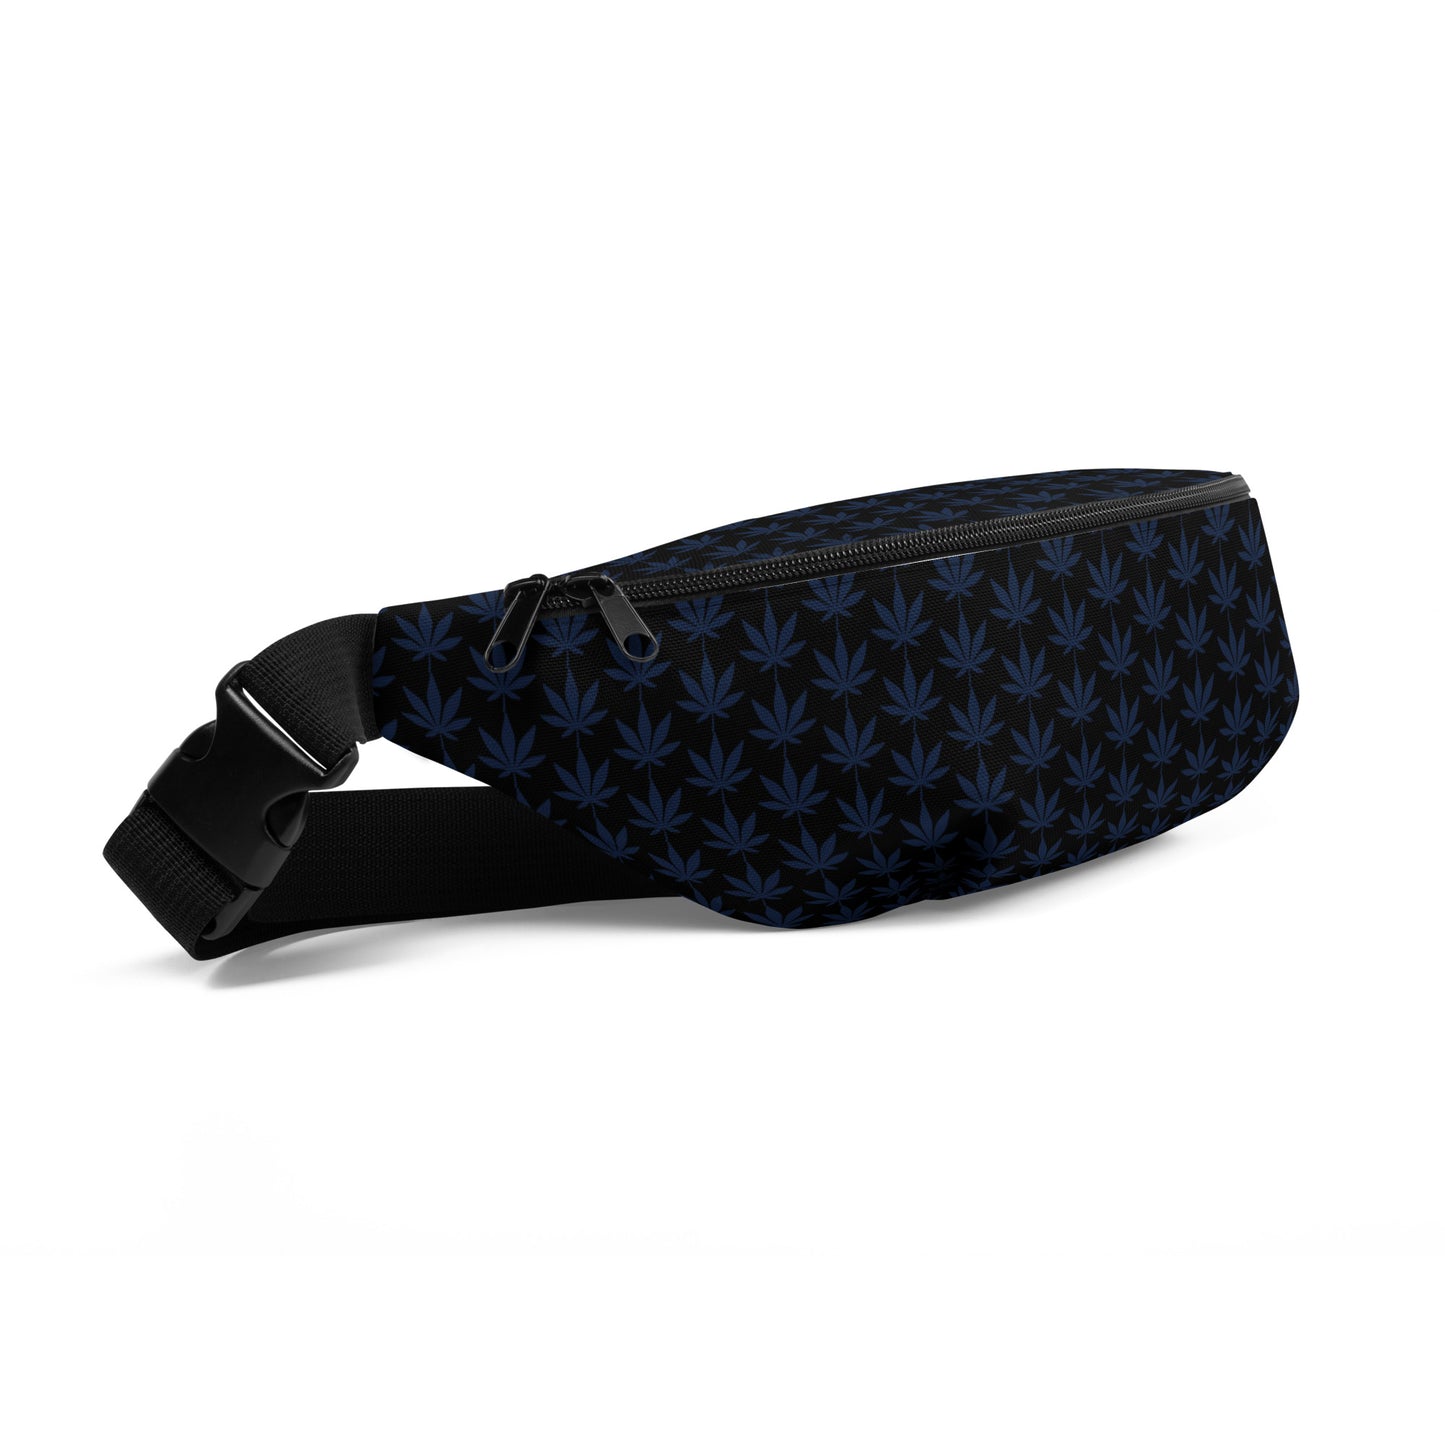 Blue And Black Fanny Pack